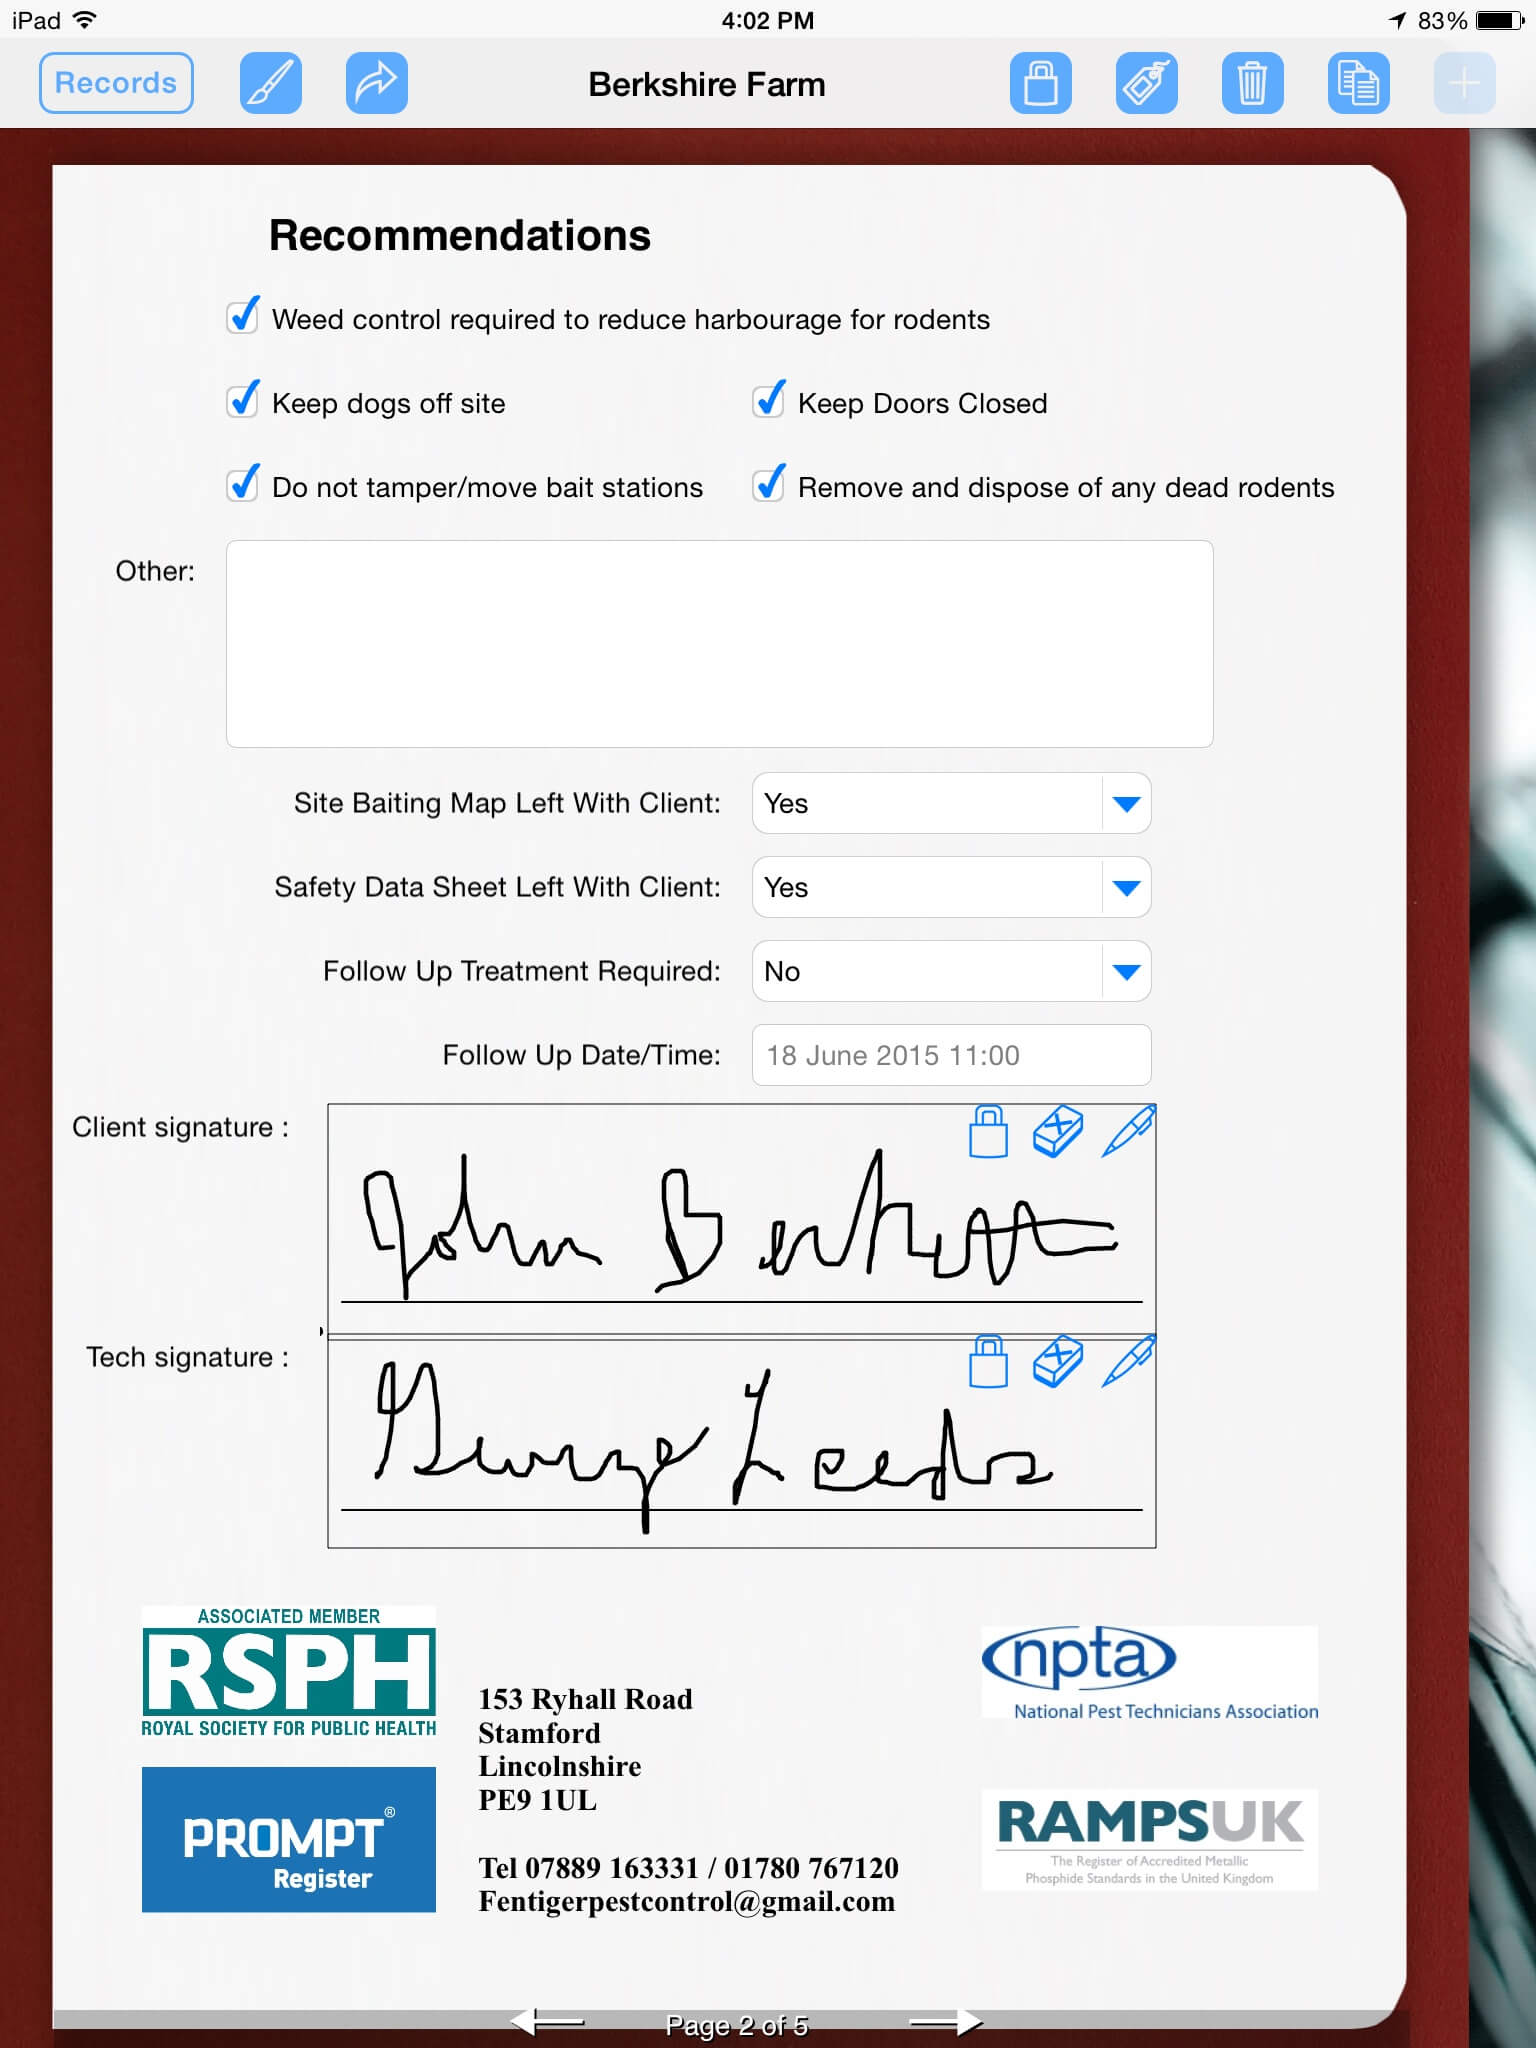 Pest Control Uses Ipad To Prepare Service Report | Form Pertaining To Pest Control Inspection Report Template